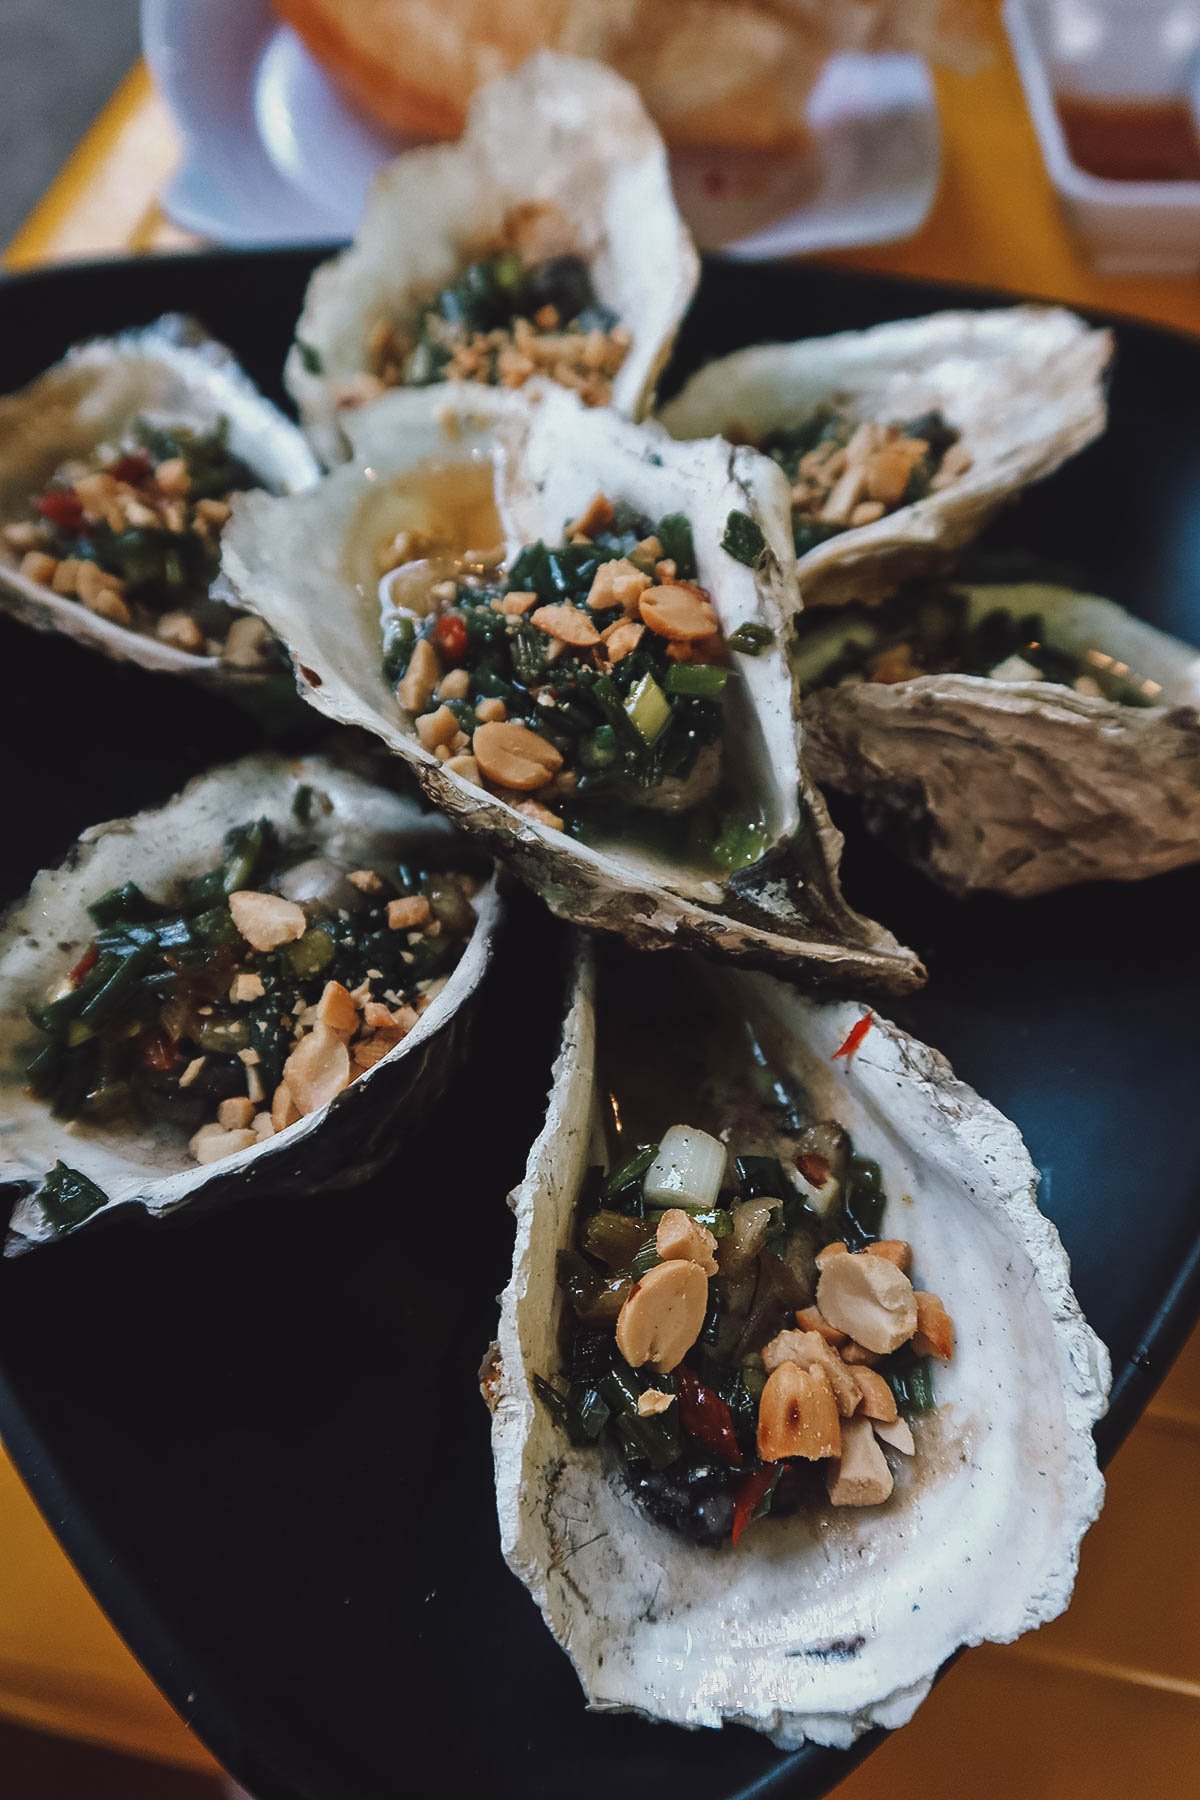 Oysters at a restaurant in Da Nang